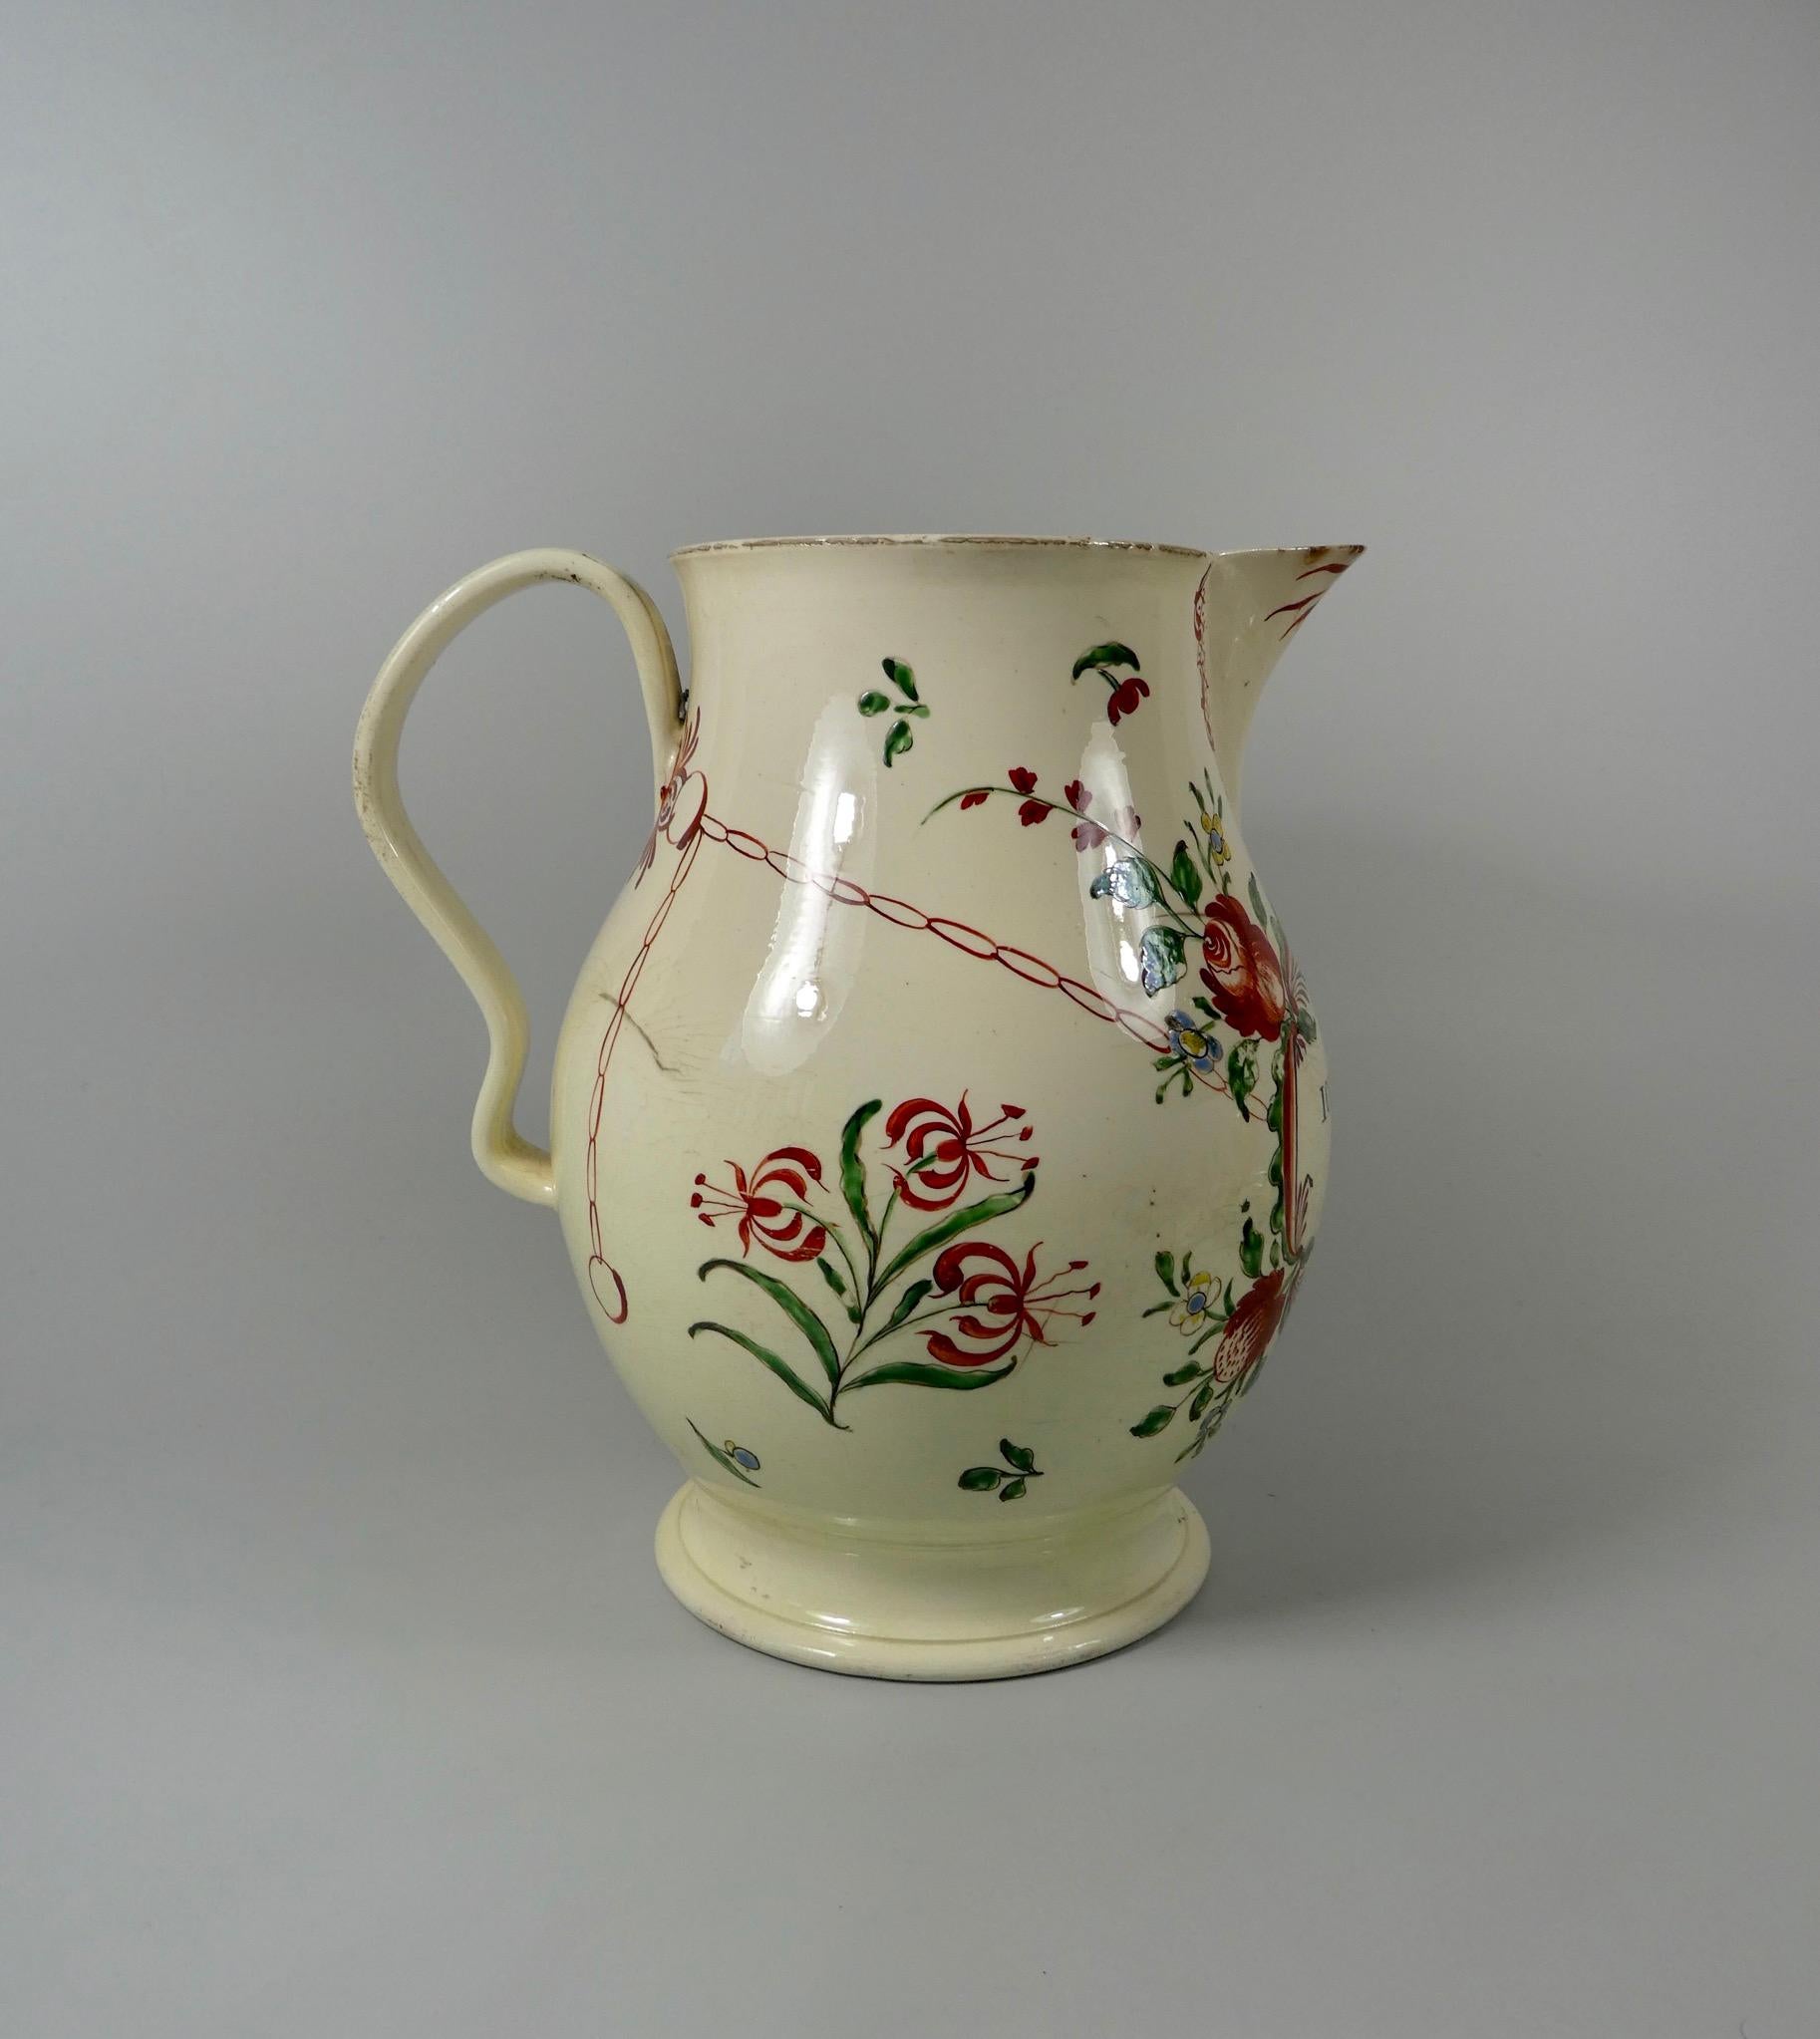 A fine and large Leeds creamware jug, dated 1773. Probably painted at the David Rhodes workshop, with an oval scrollwork panel, inscribed ‘John Pickford, 1773’, beneath the spout, which is painted in iron red, with scrollwork. The panel is suspended